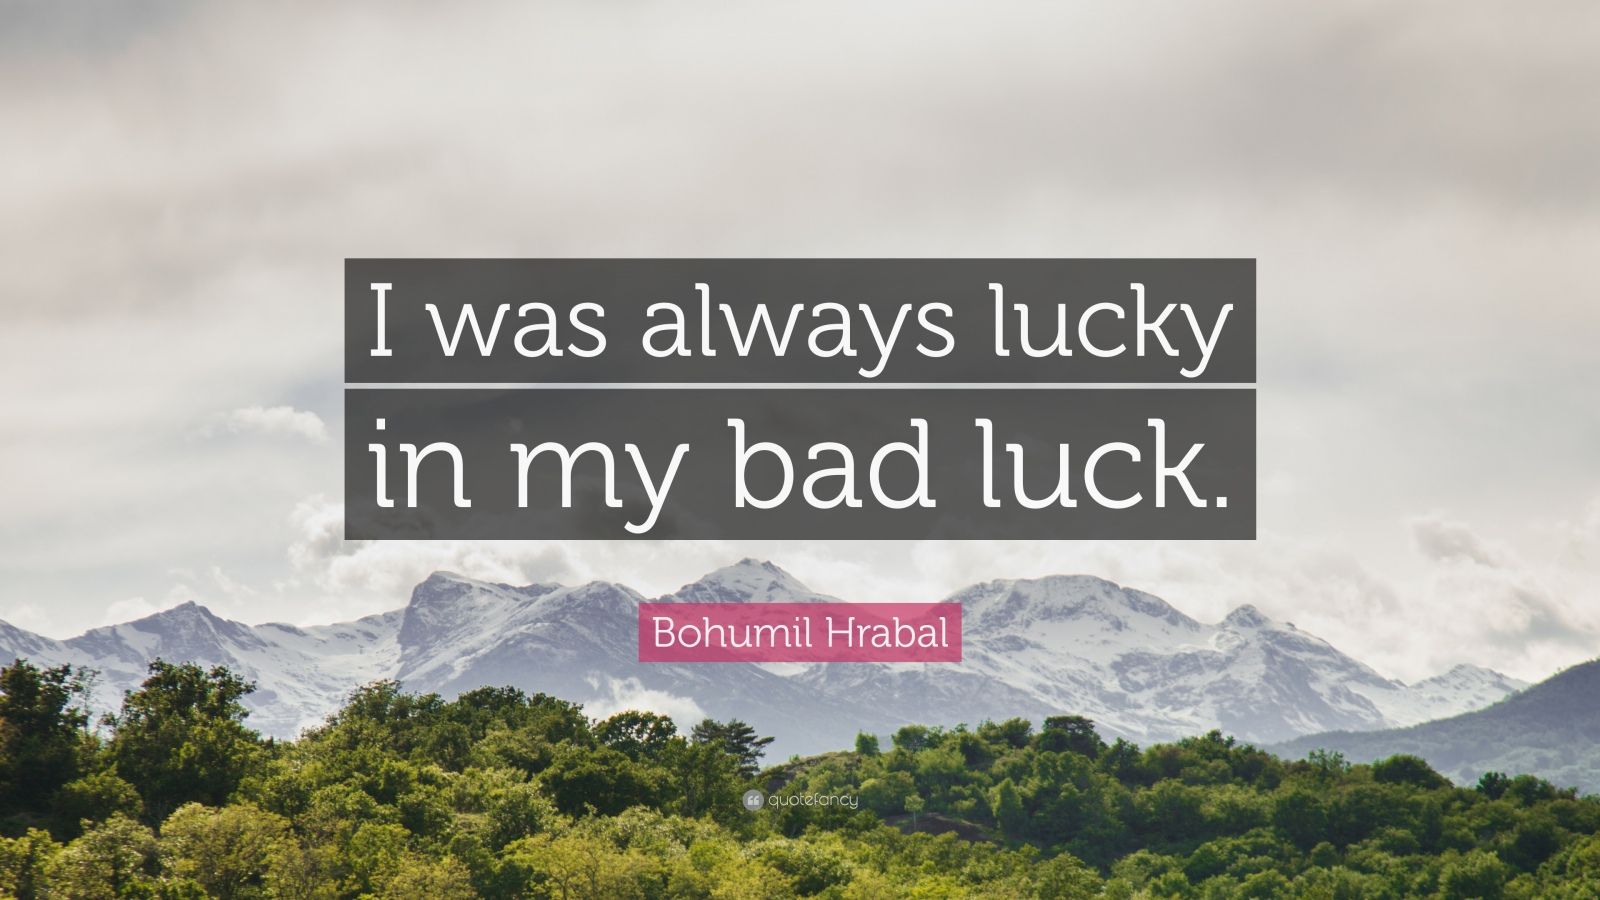 Bohumil Hrabal Quote: “I was always lucky in my bad luck.”